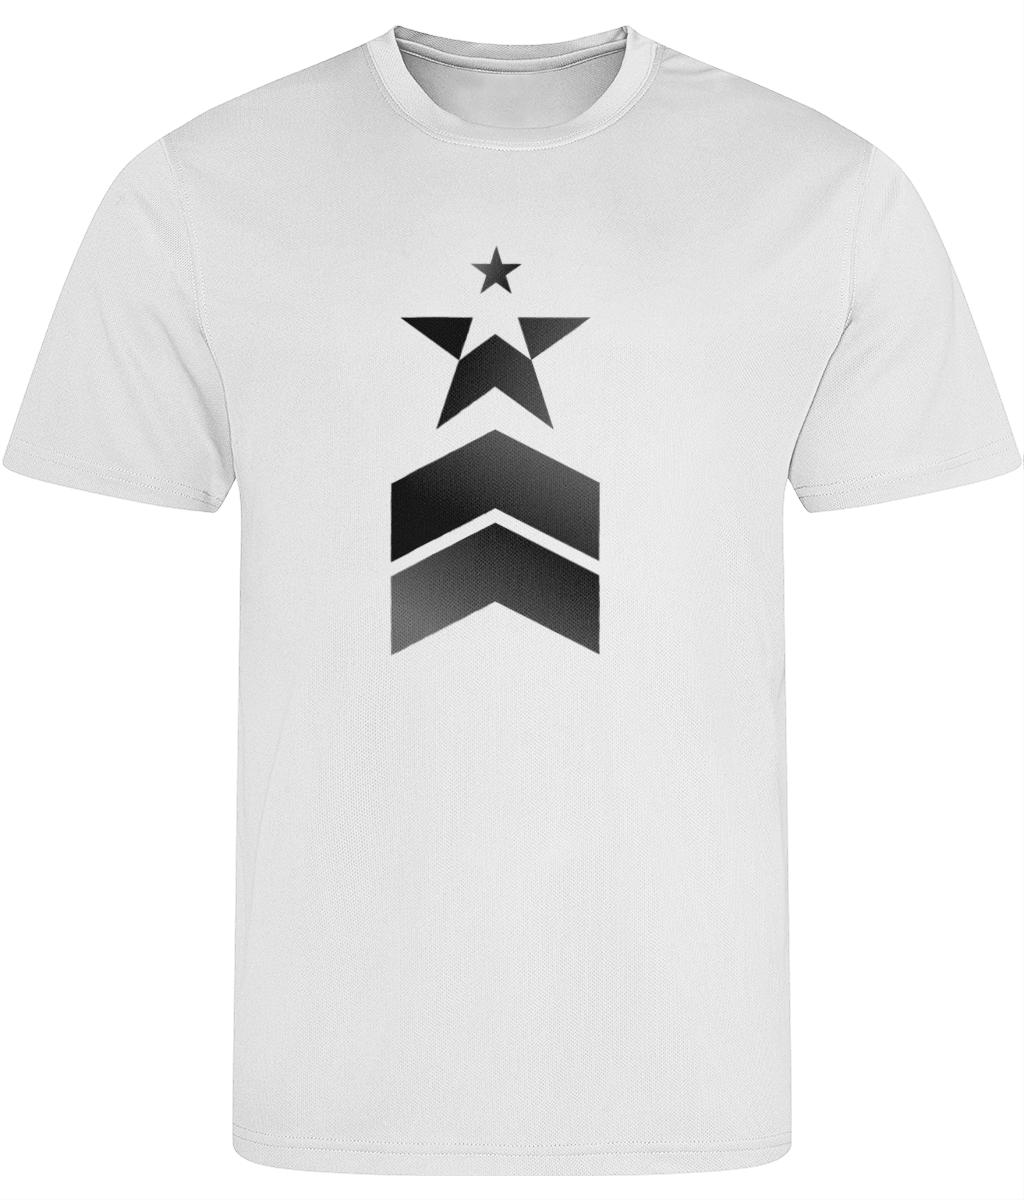 Stars & stripes Recycled Polyester Cool T-shirt